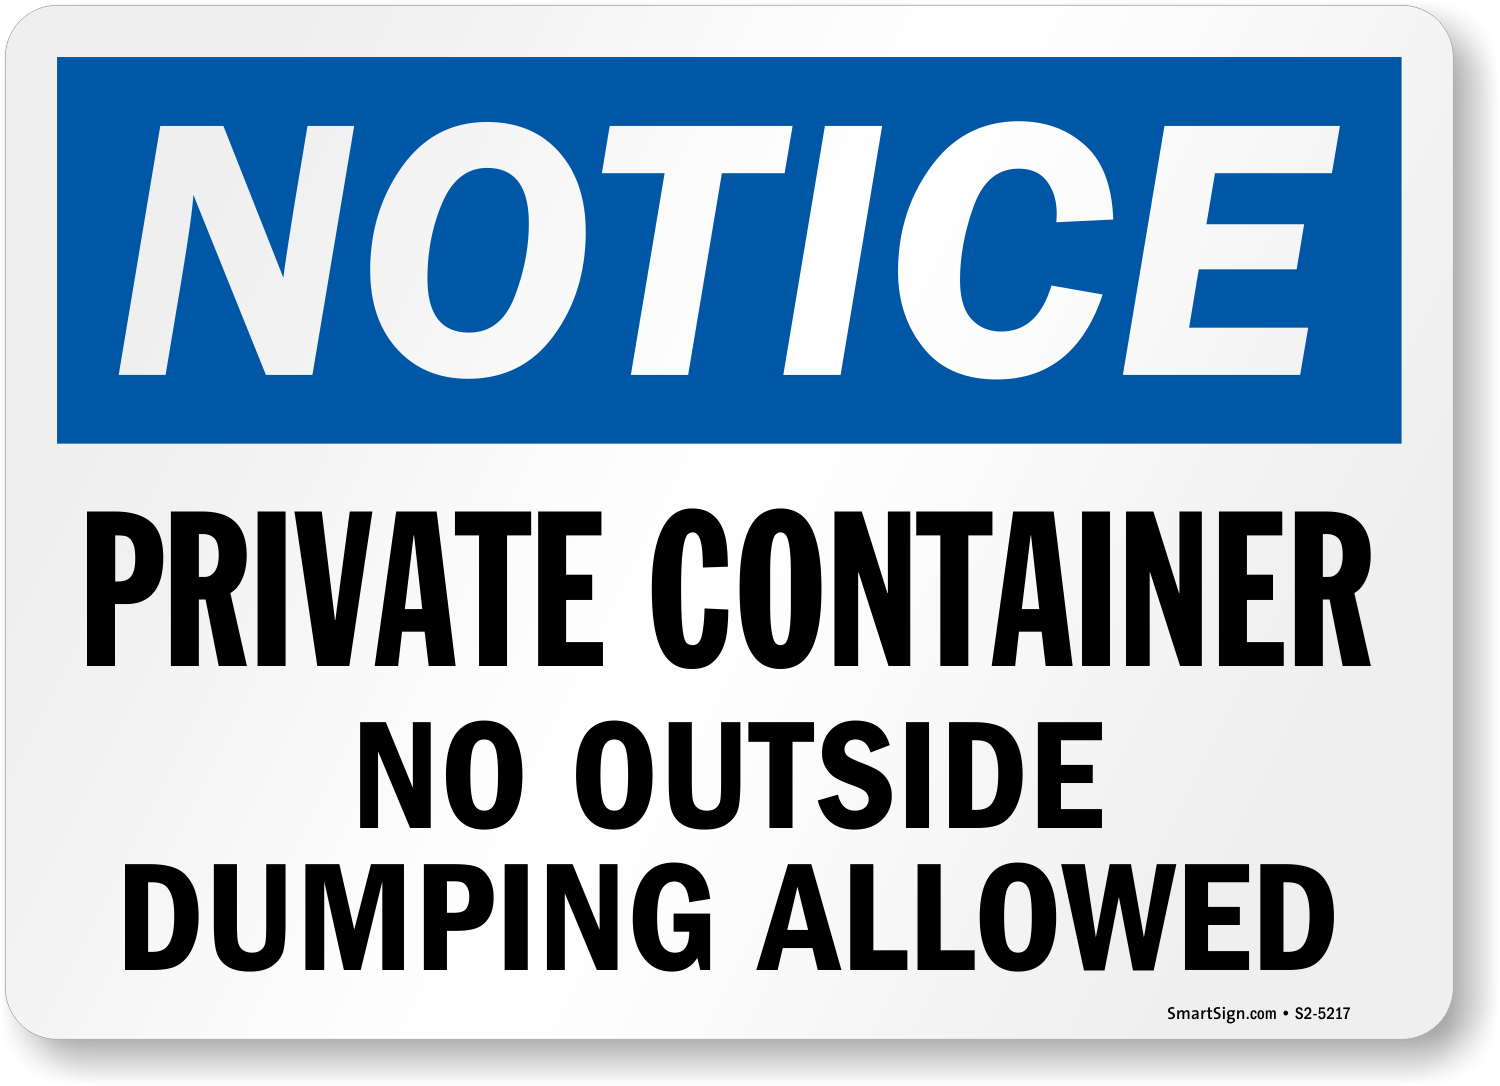 Dumpster Signs - Dumpster Rules Signs at Best Prices